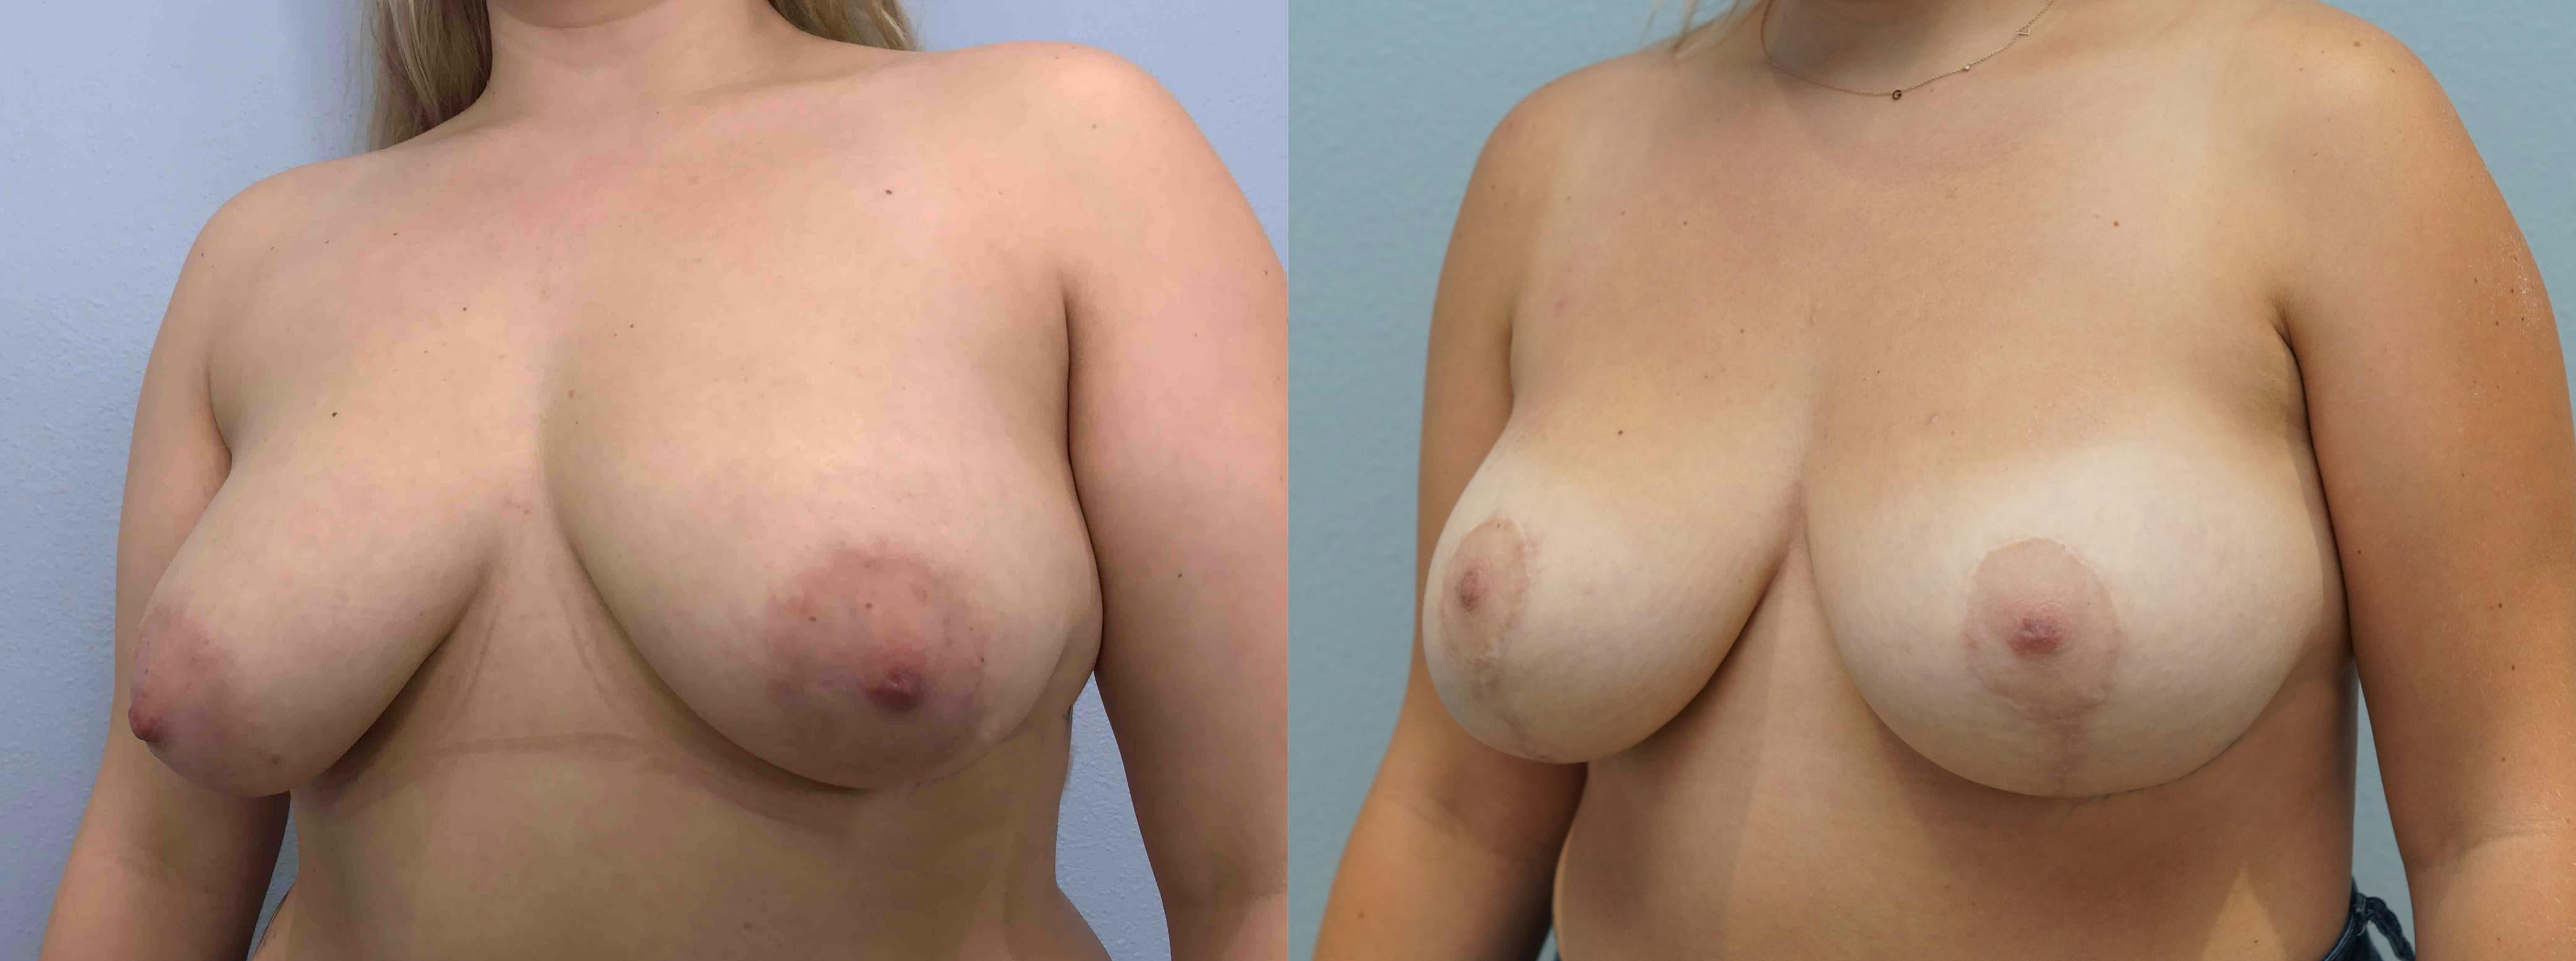 Breast Lift With Implants Gallery - Patient 75539711 - Image 4